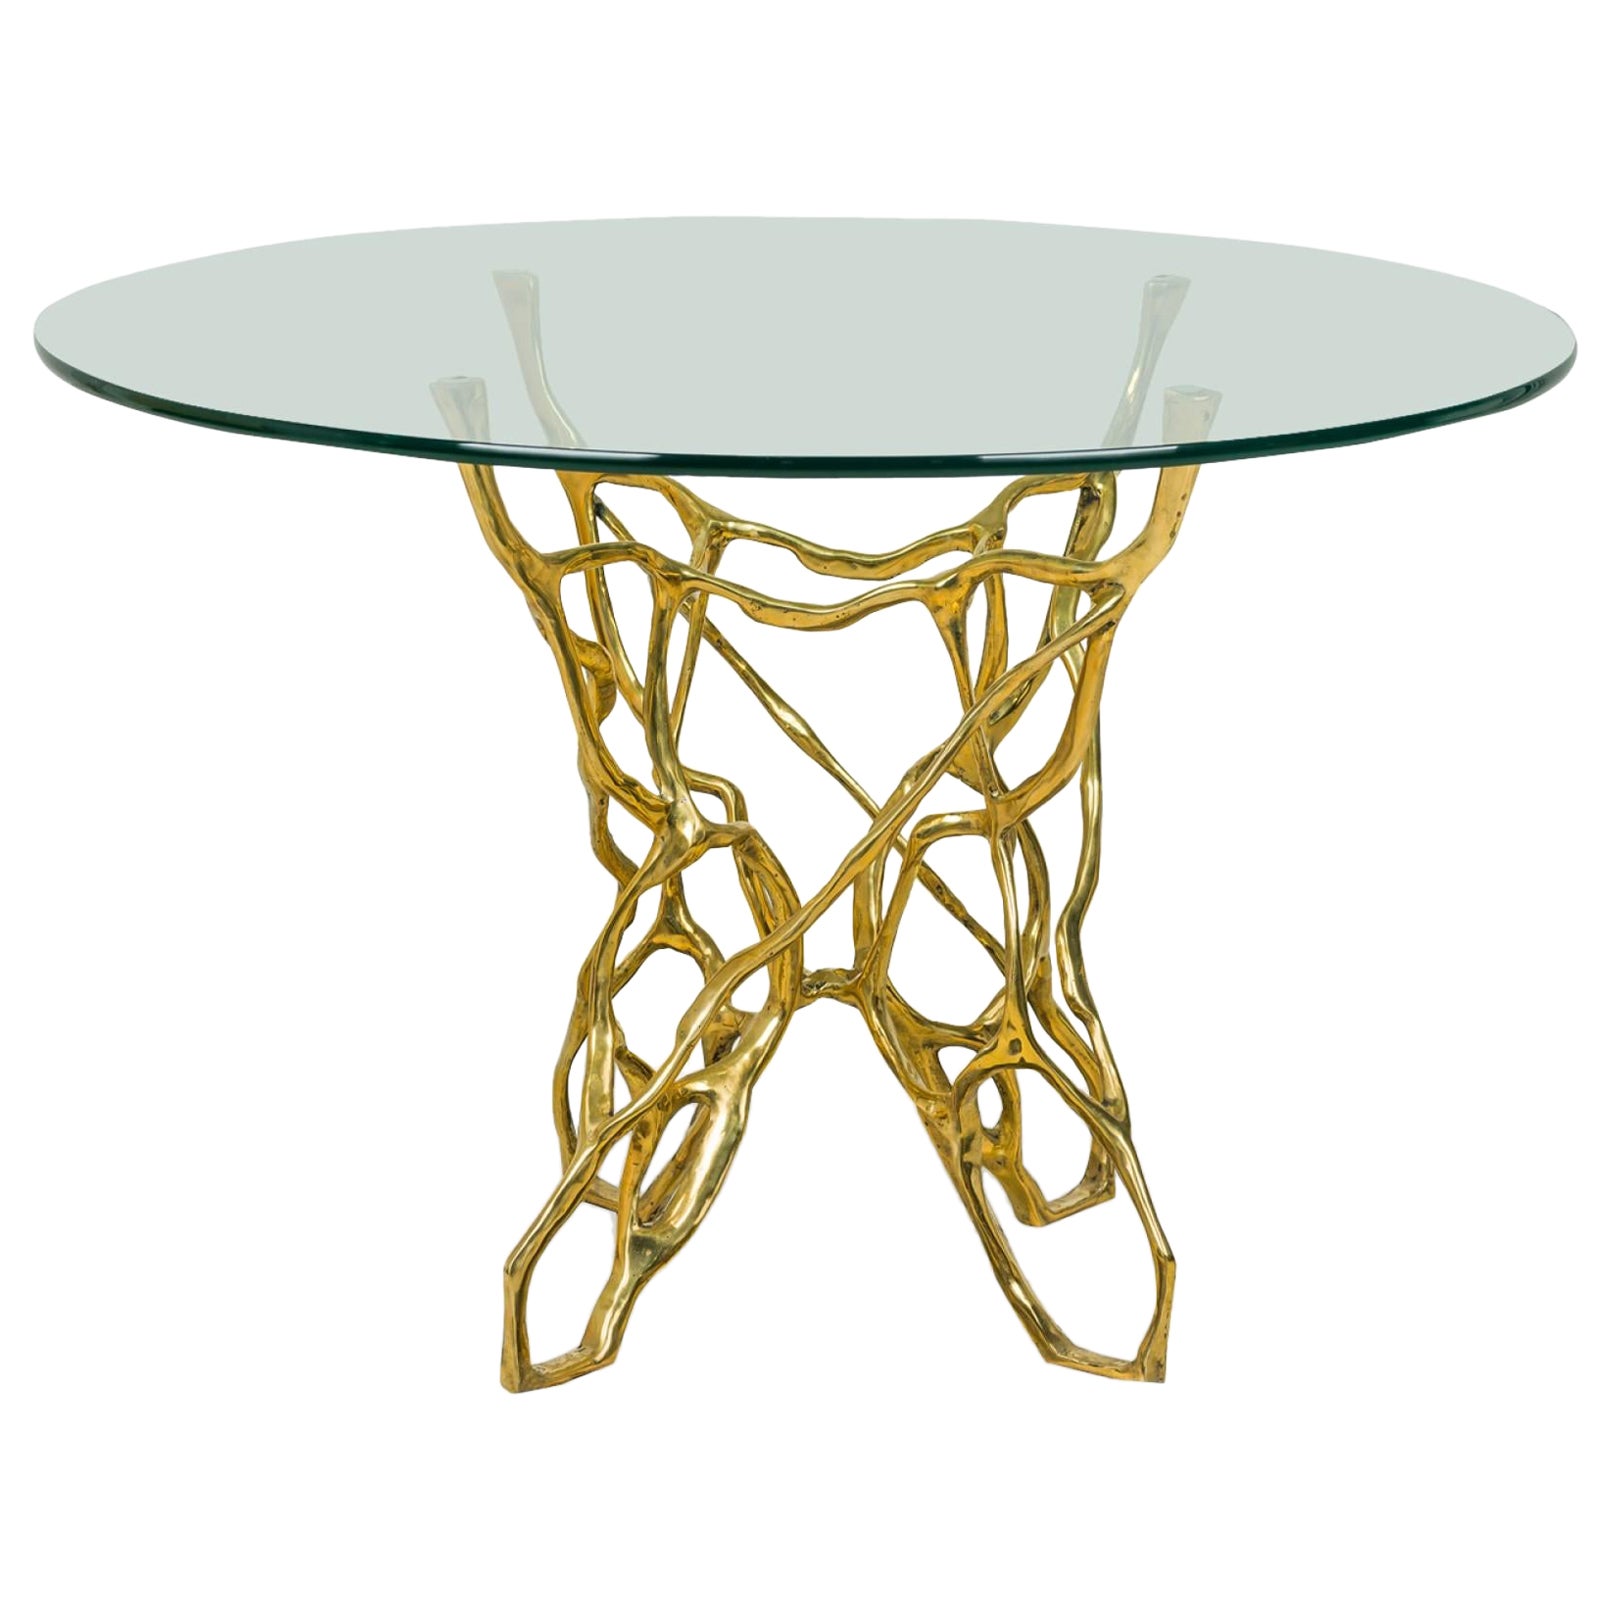 "Catarina" American-Style Bronze Biomorphic Dining Table with Circular Glass Top For Sale